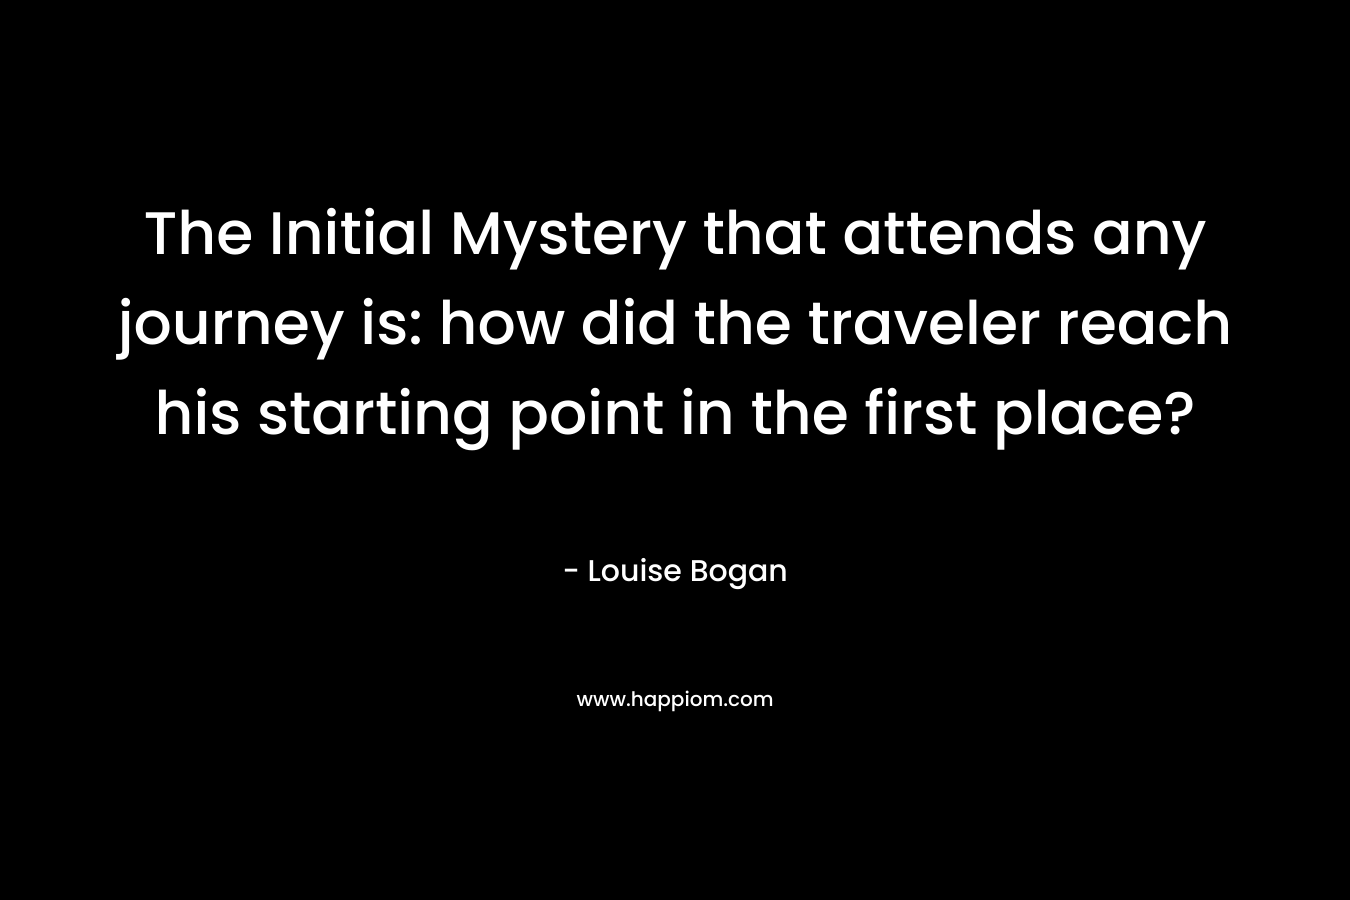 The Initial Mystery that attends any journey is: how did the traveler reach his starting point in the first place? – Louise Bogan